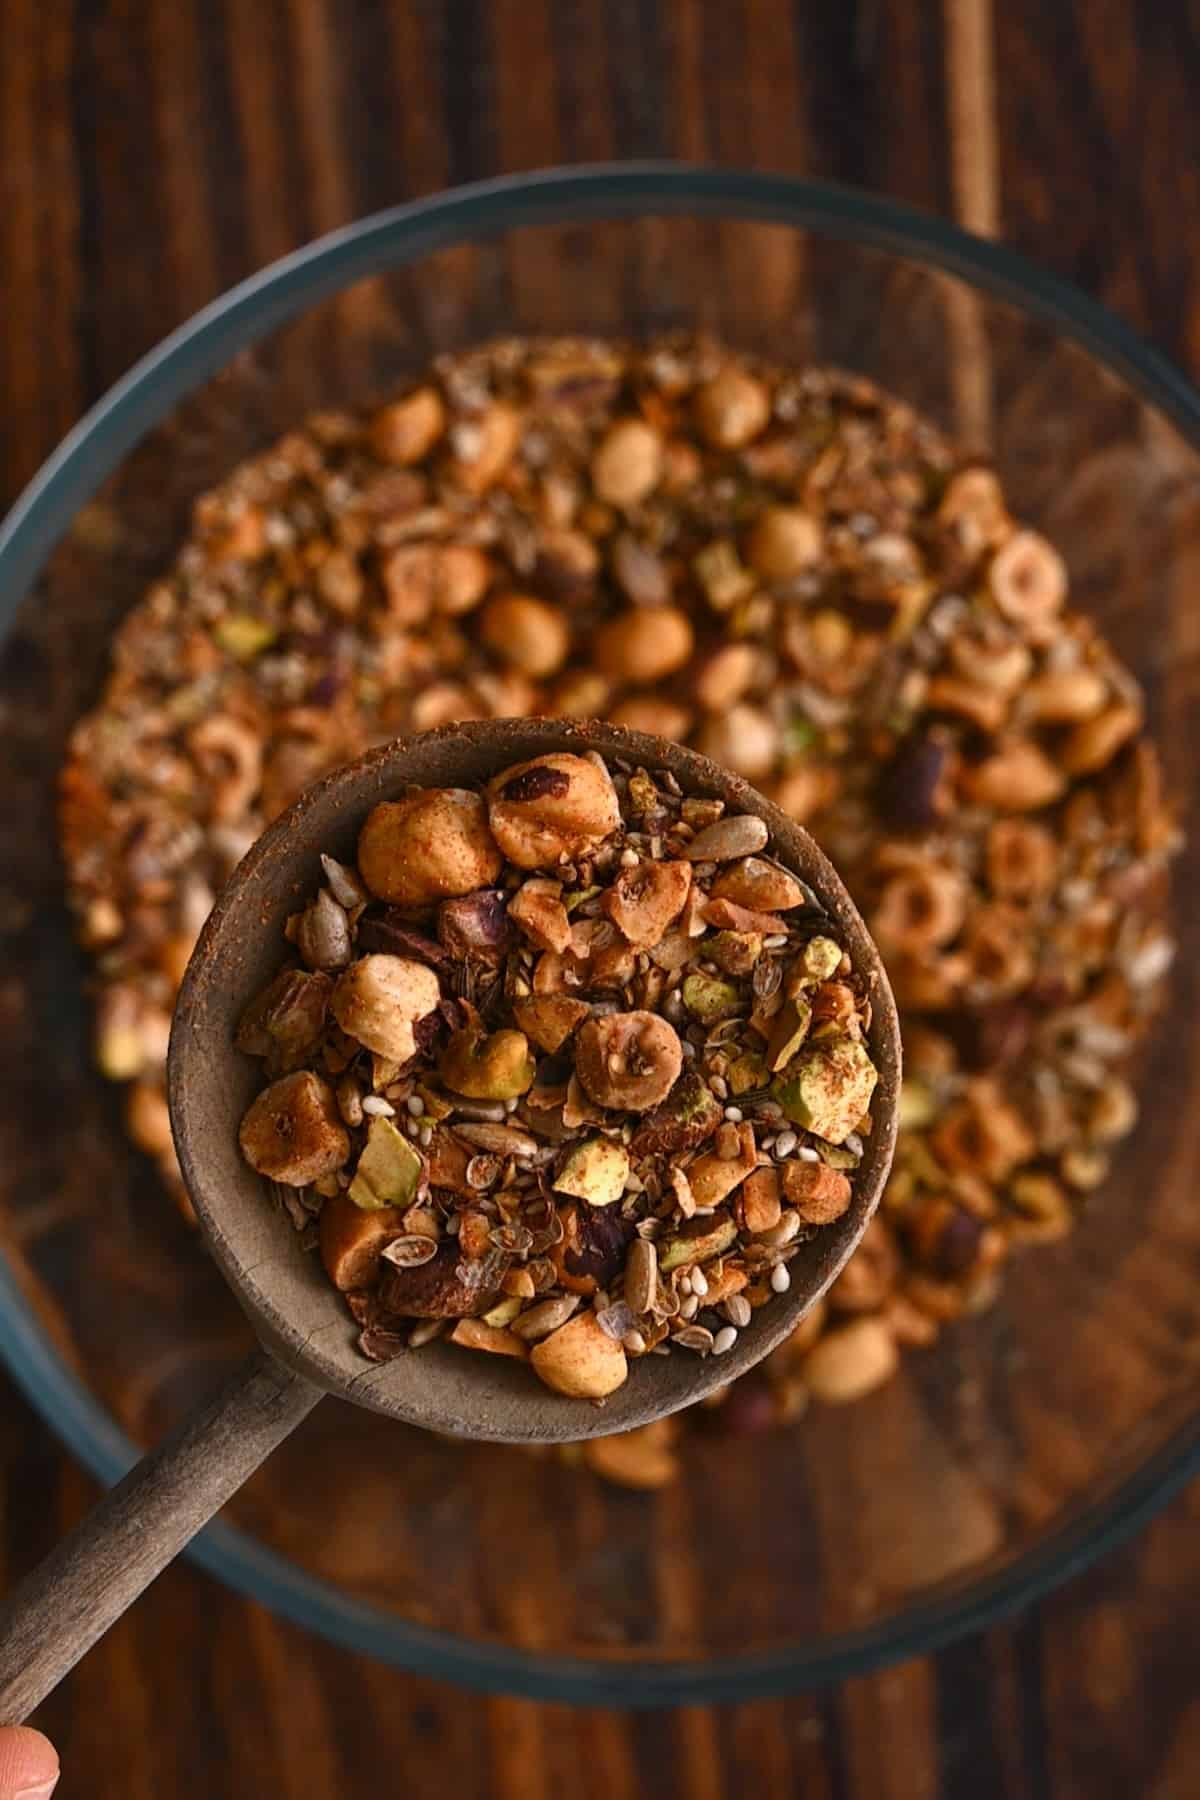 A spoonful of homemade dukkah spice